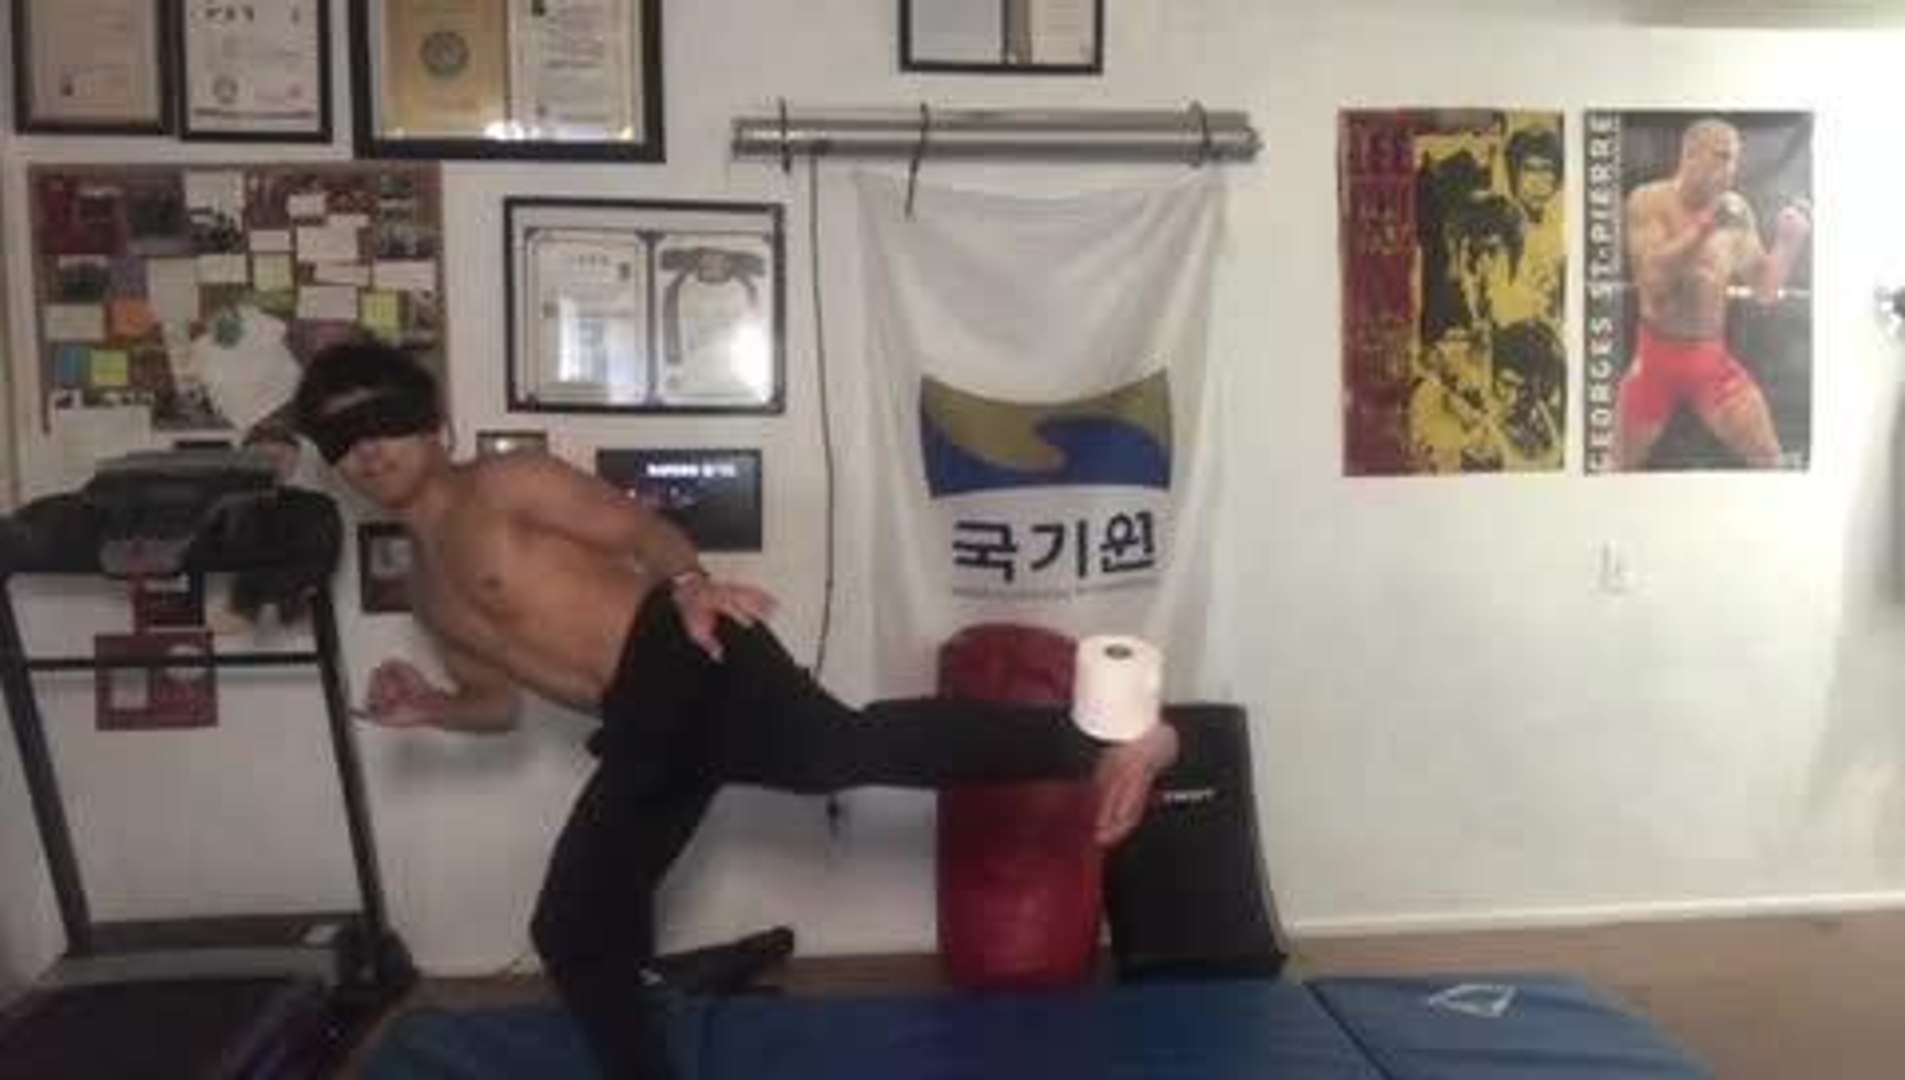 Blindfolded martial arts master slams down a sledgehammer inches